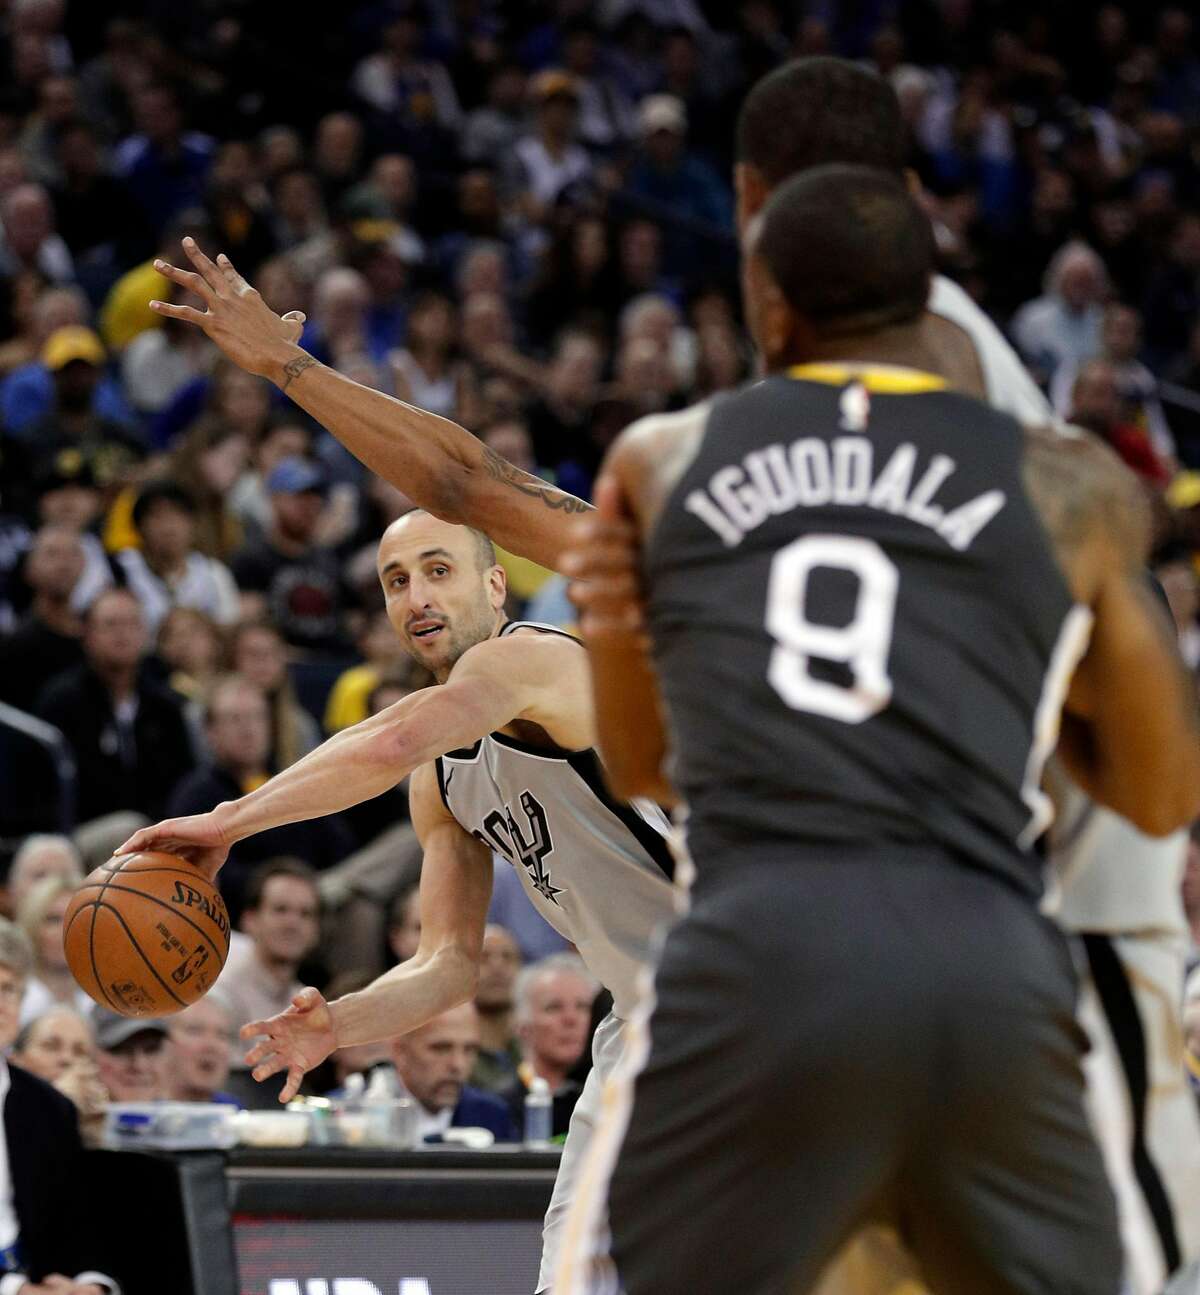 Manu Ginobli (20) passes to LaMarcus Aldridge (12) in the first half as the Golden State Warriors played the San Antonio Spurs at Oracle Arena in Oakland, Calif., on Saturday, February 10, 2018.